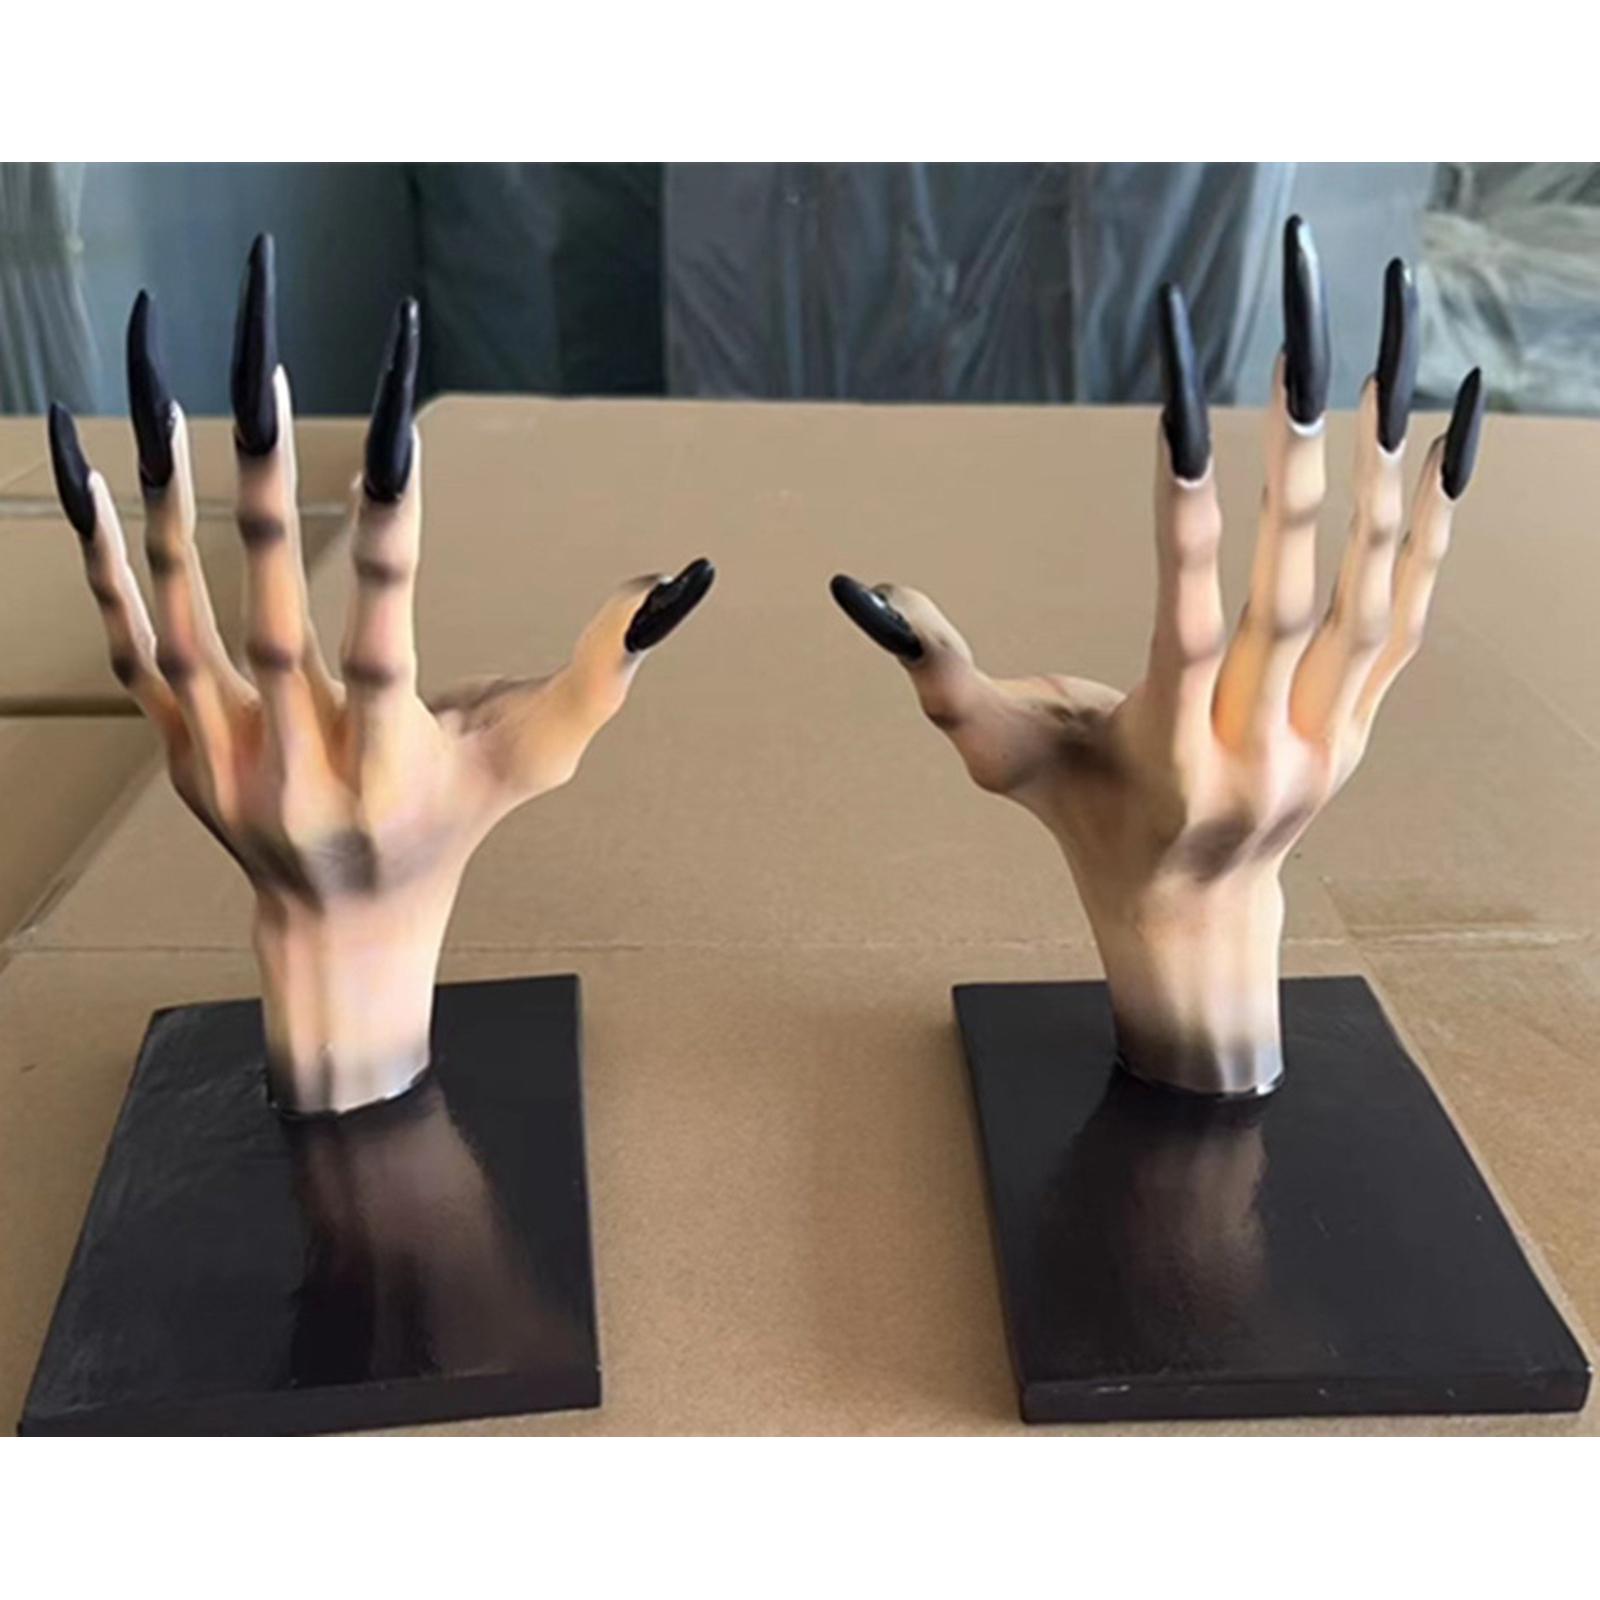 2x Witch Hand Bookends Statue with Anti Skid Base for Desktop Bookshelf